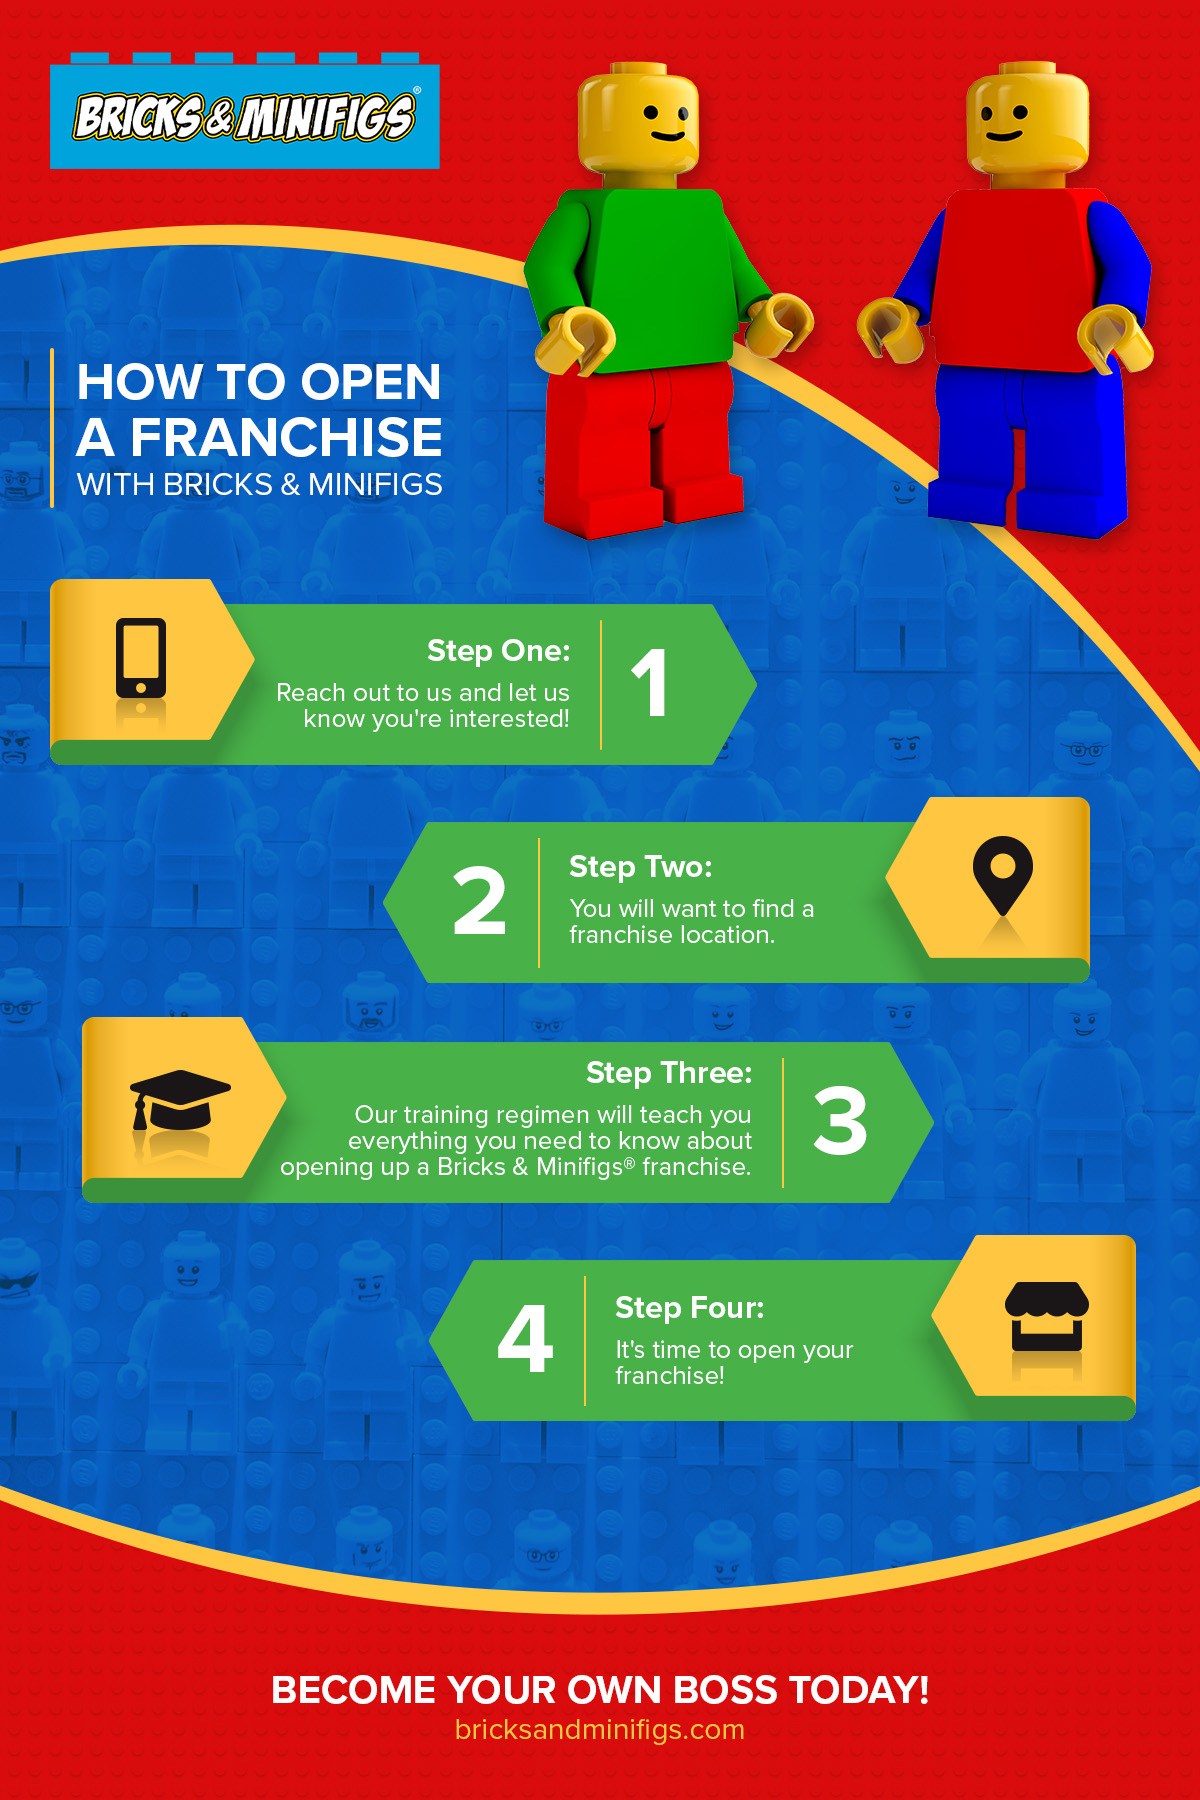 How to Open a Franchise with Bricks & Minifigs Infographic